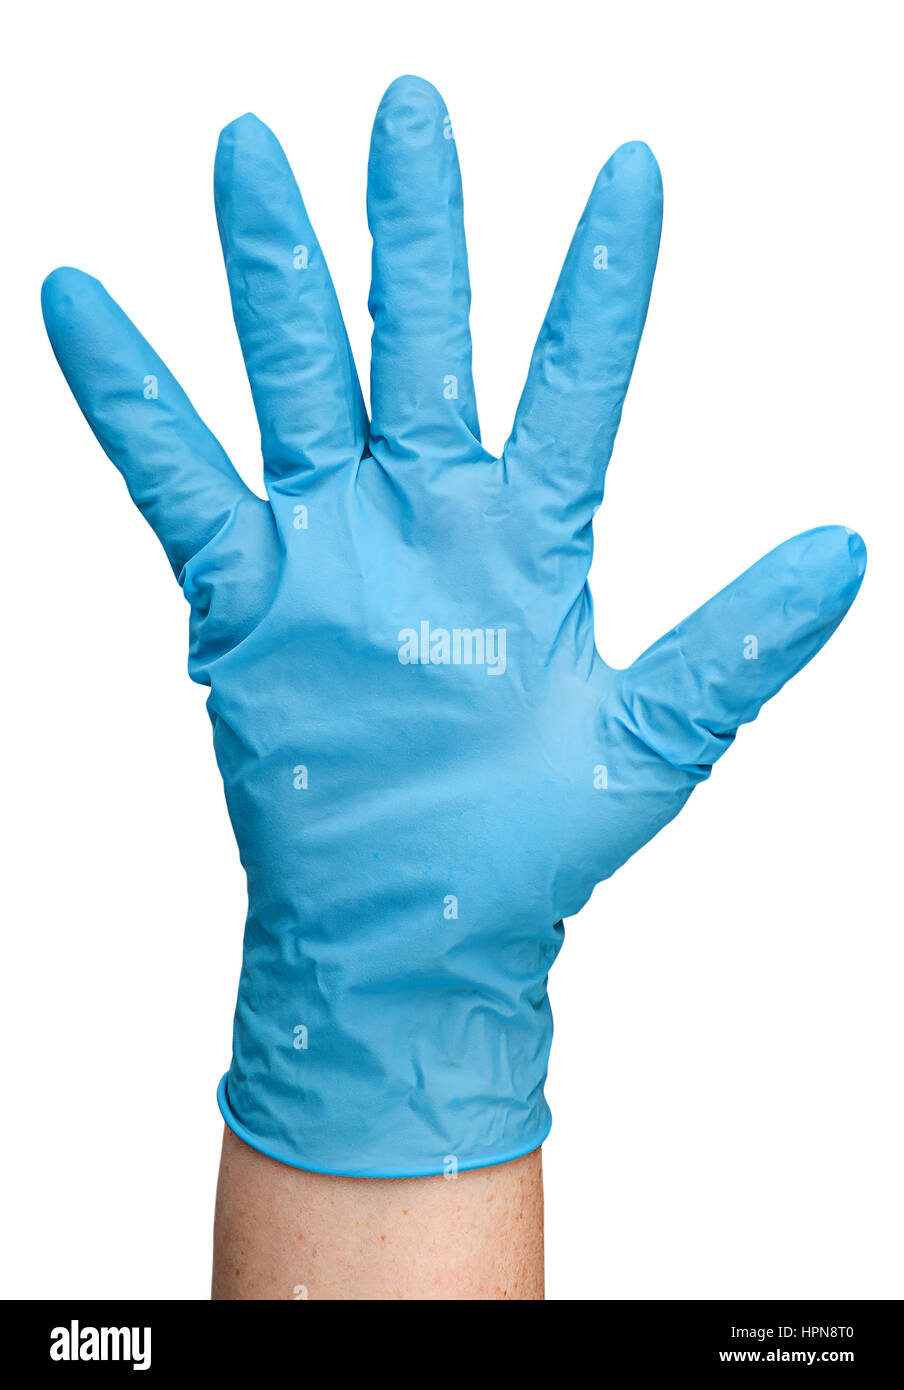 Hand in blue latex glove isolated on white background Stock Photo